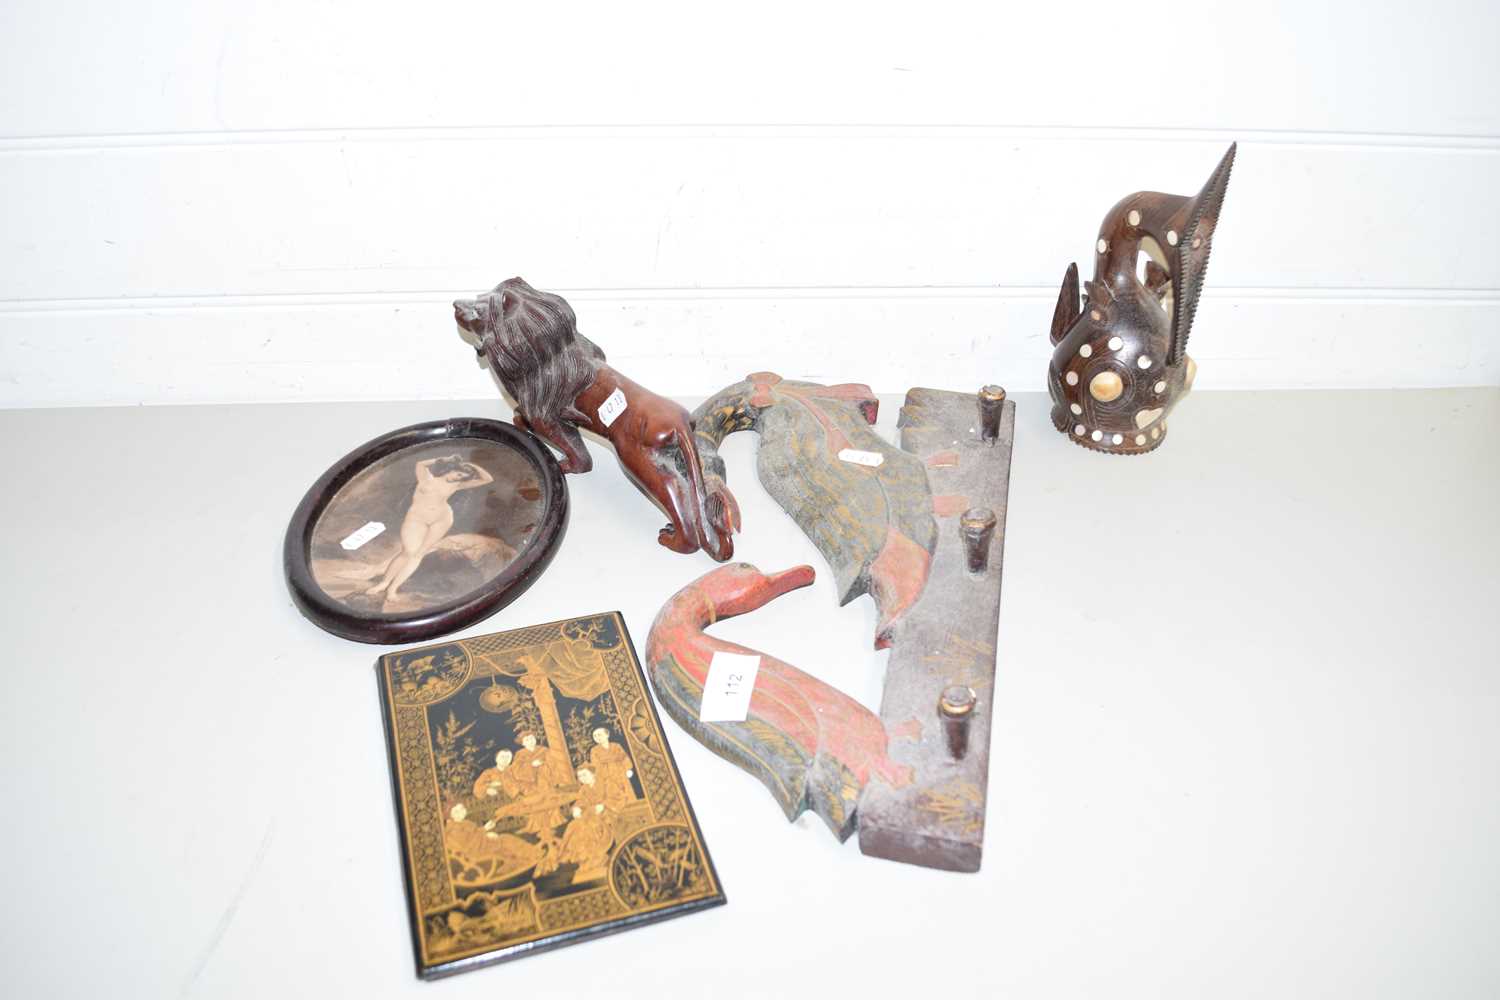 MIXED LOT COMPRISING A WOODEN COAT RACK DECORATED WITH DUCKS, WOODEN MODEL LION, SMALL LACQUERED